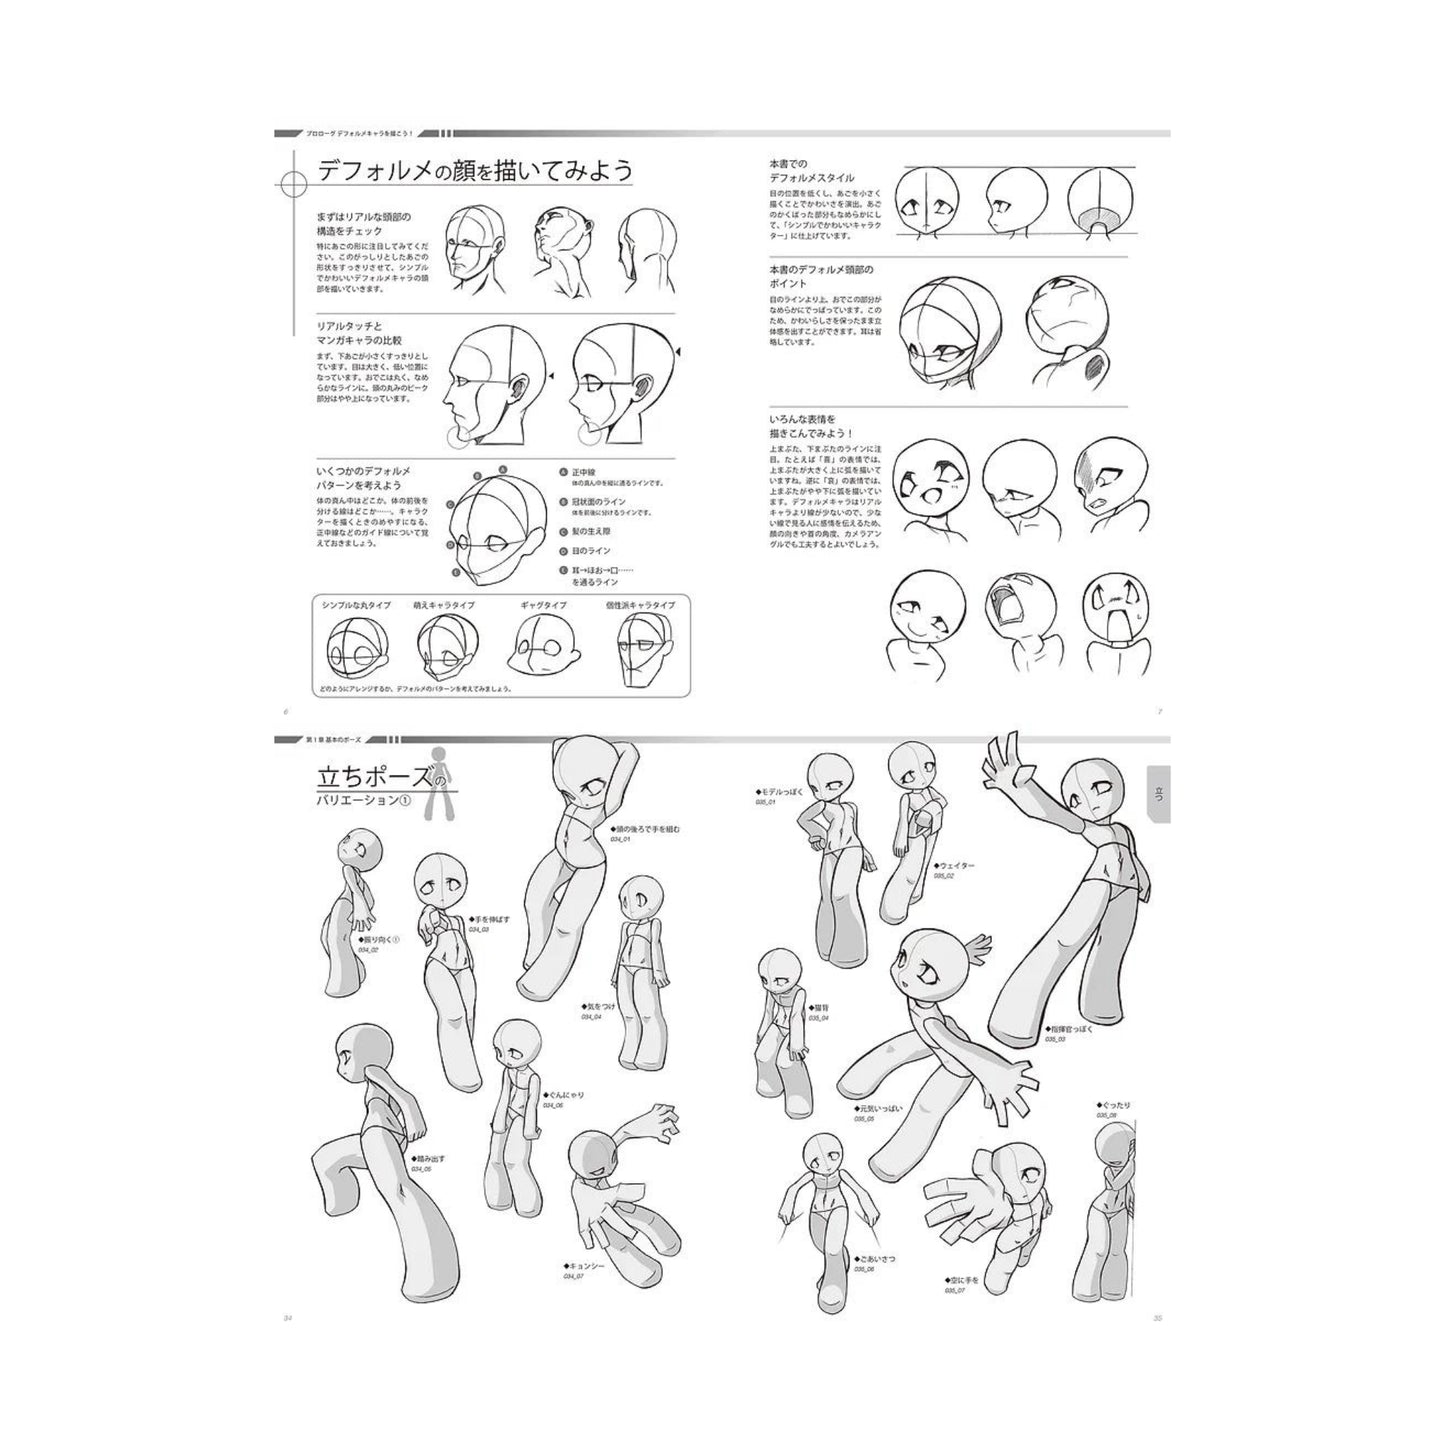 How to draw - jap. Zeichenbuch - Super Deformed Pose Collection: Basisposen inkl. CD-ROM